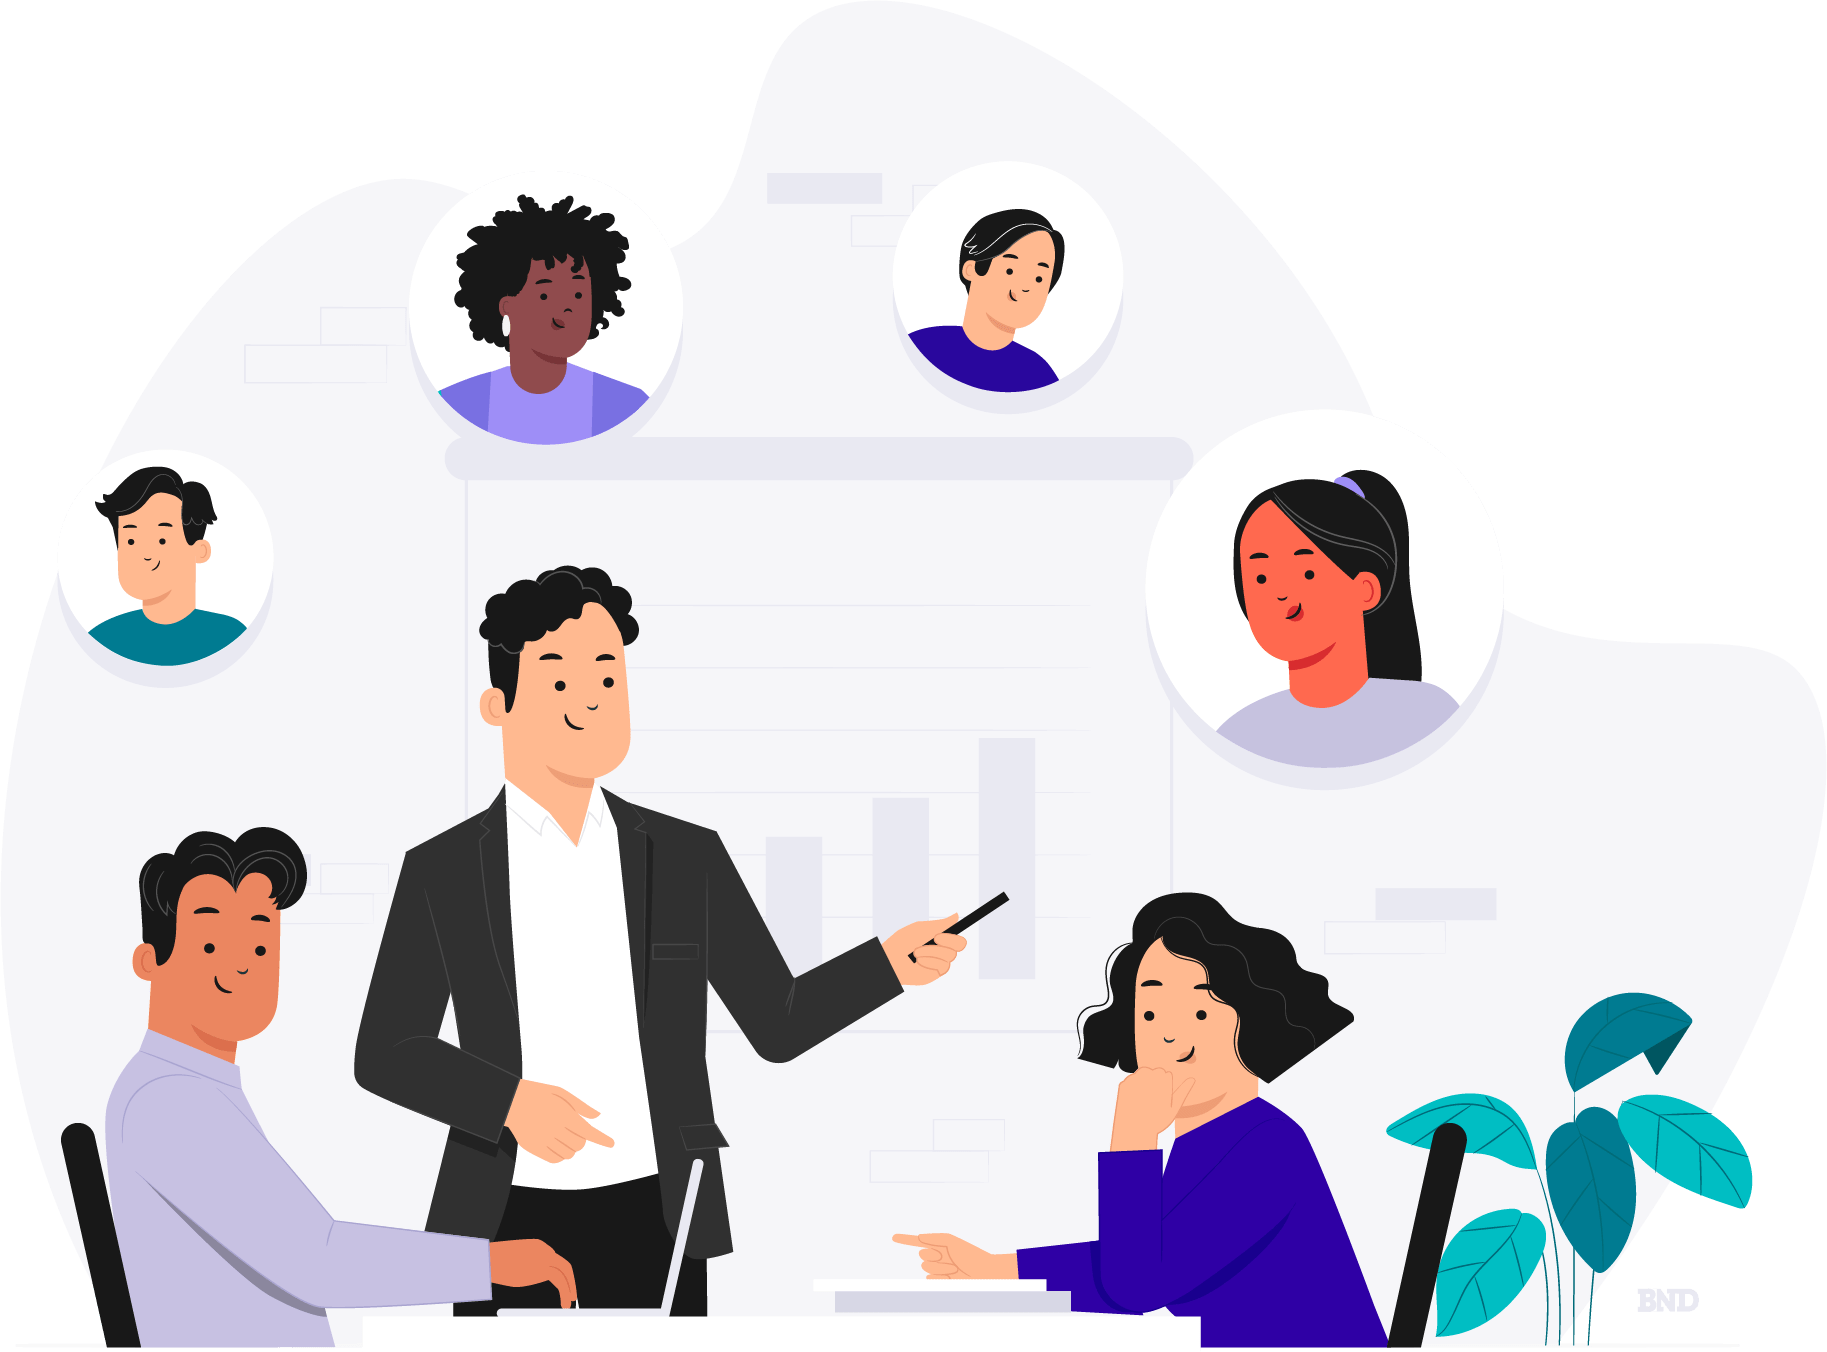 graphic of colleagues talking at a desk with other faces in thought bubbles above them